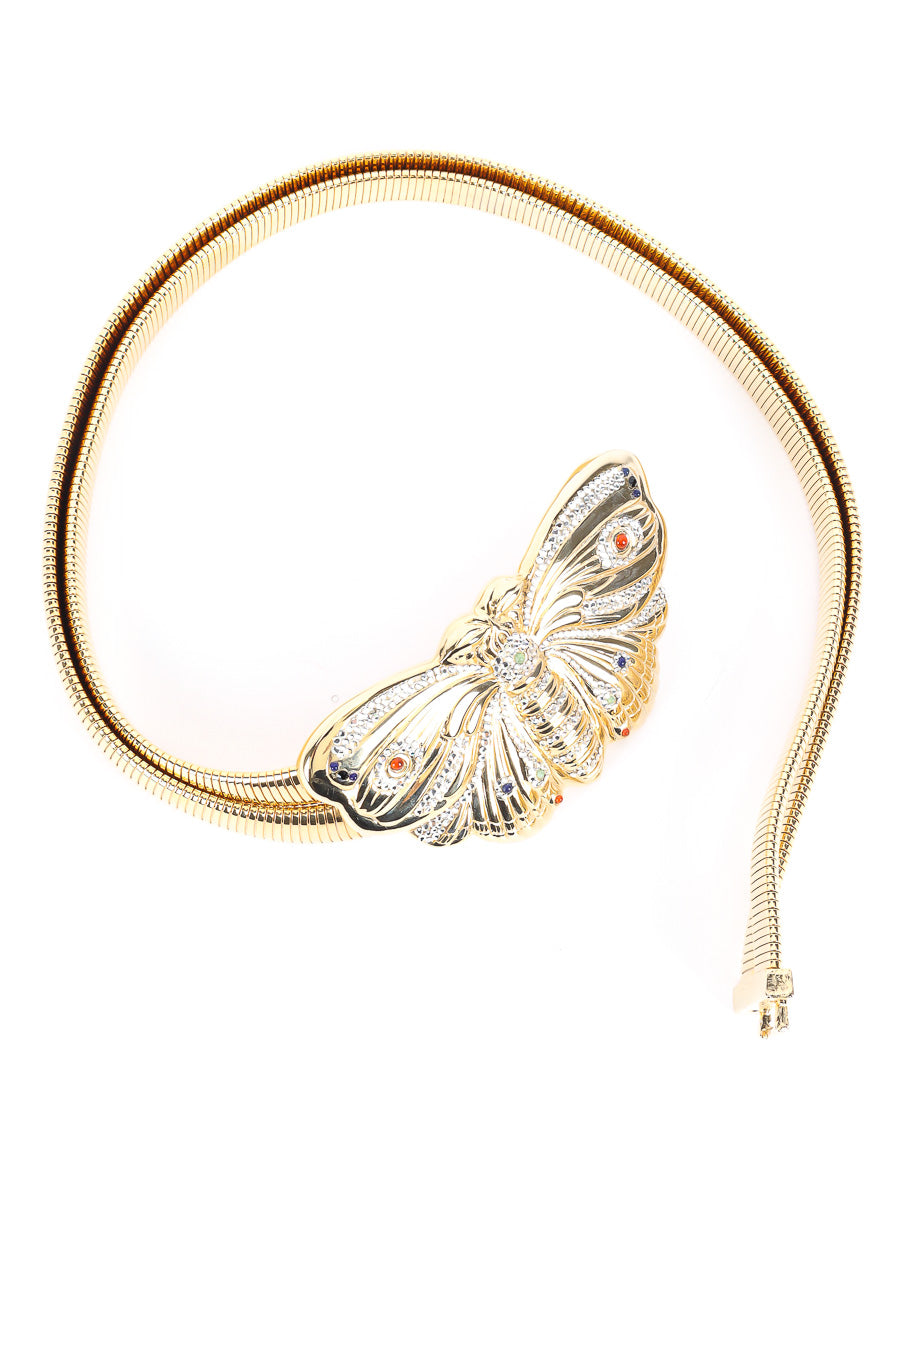 Jeweled butterfly belt by Judith Leiber Full View. @recessla